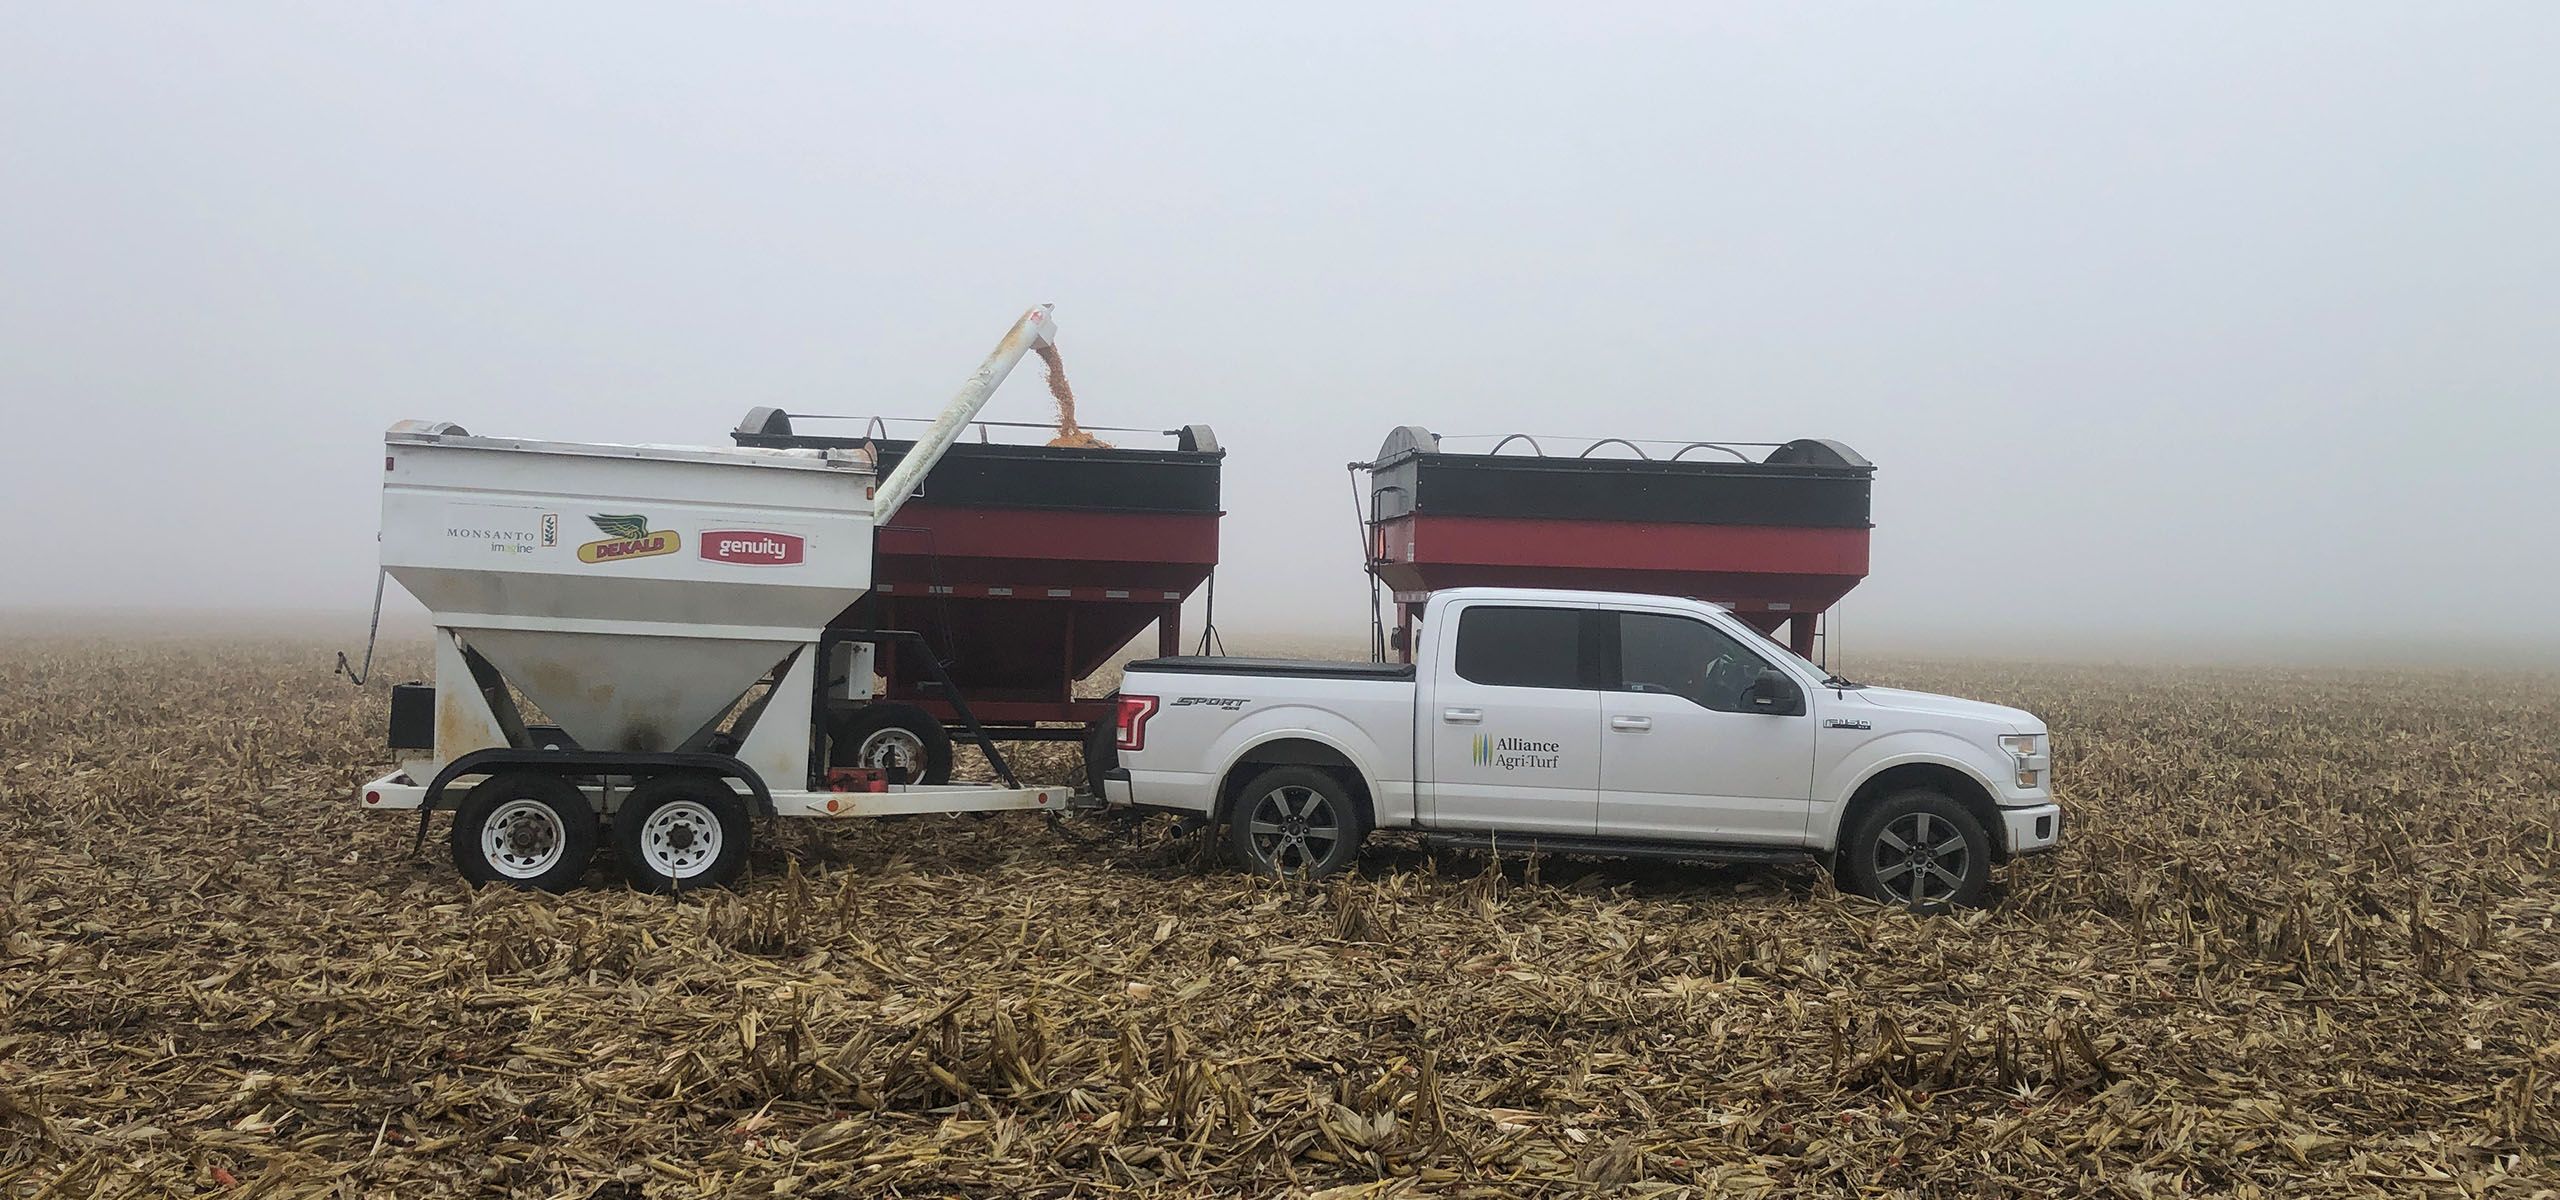 Alliance Agri-Turf careers image truck and grain loader at cropland